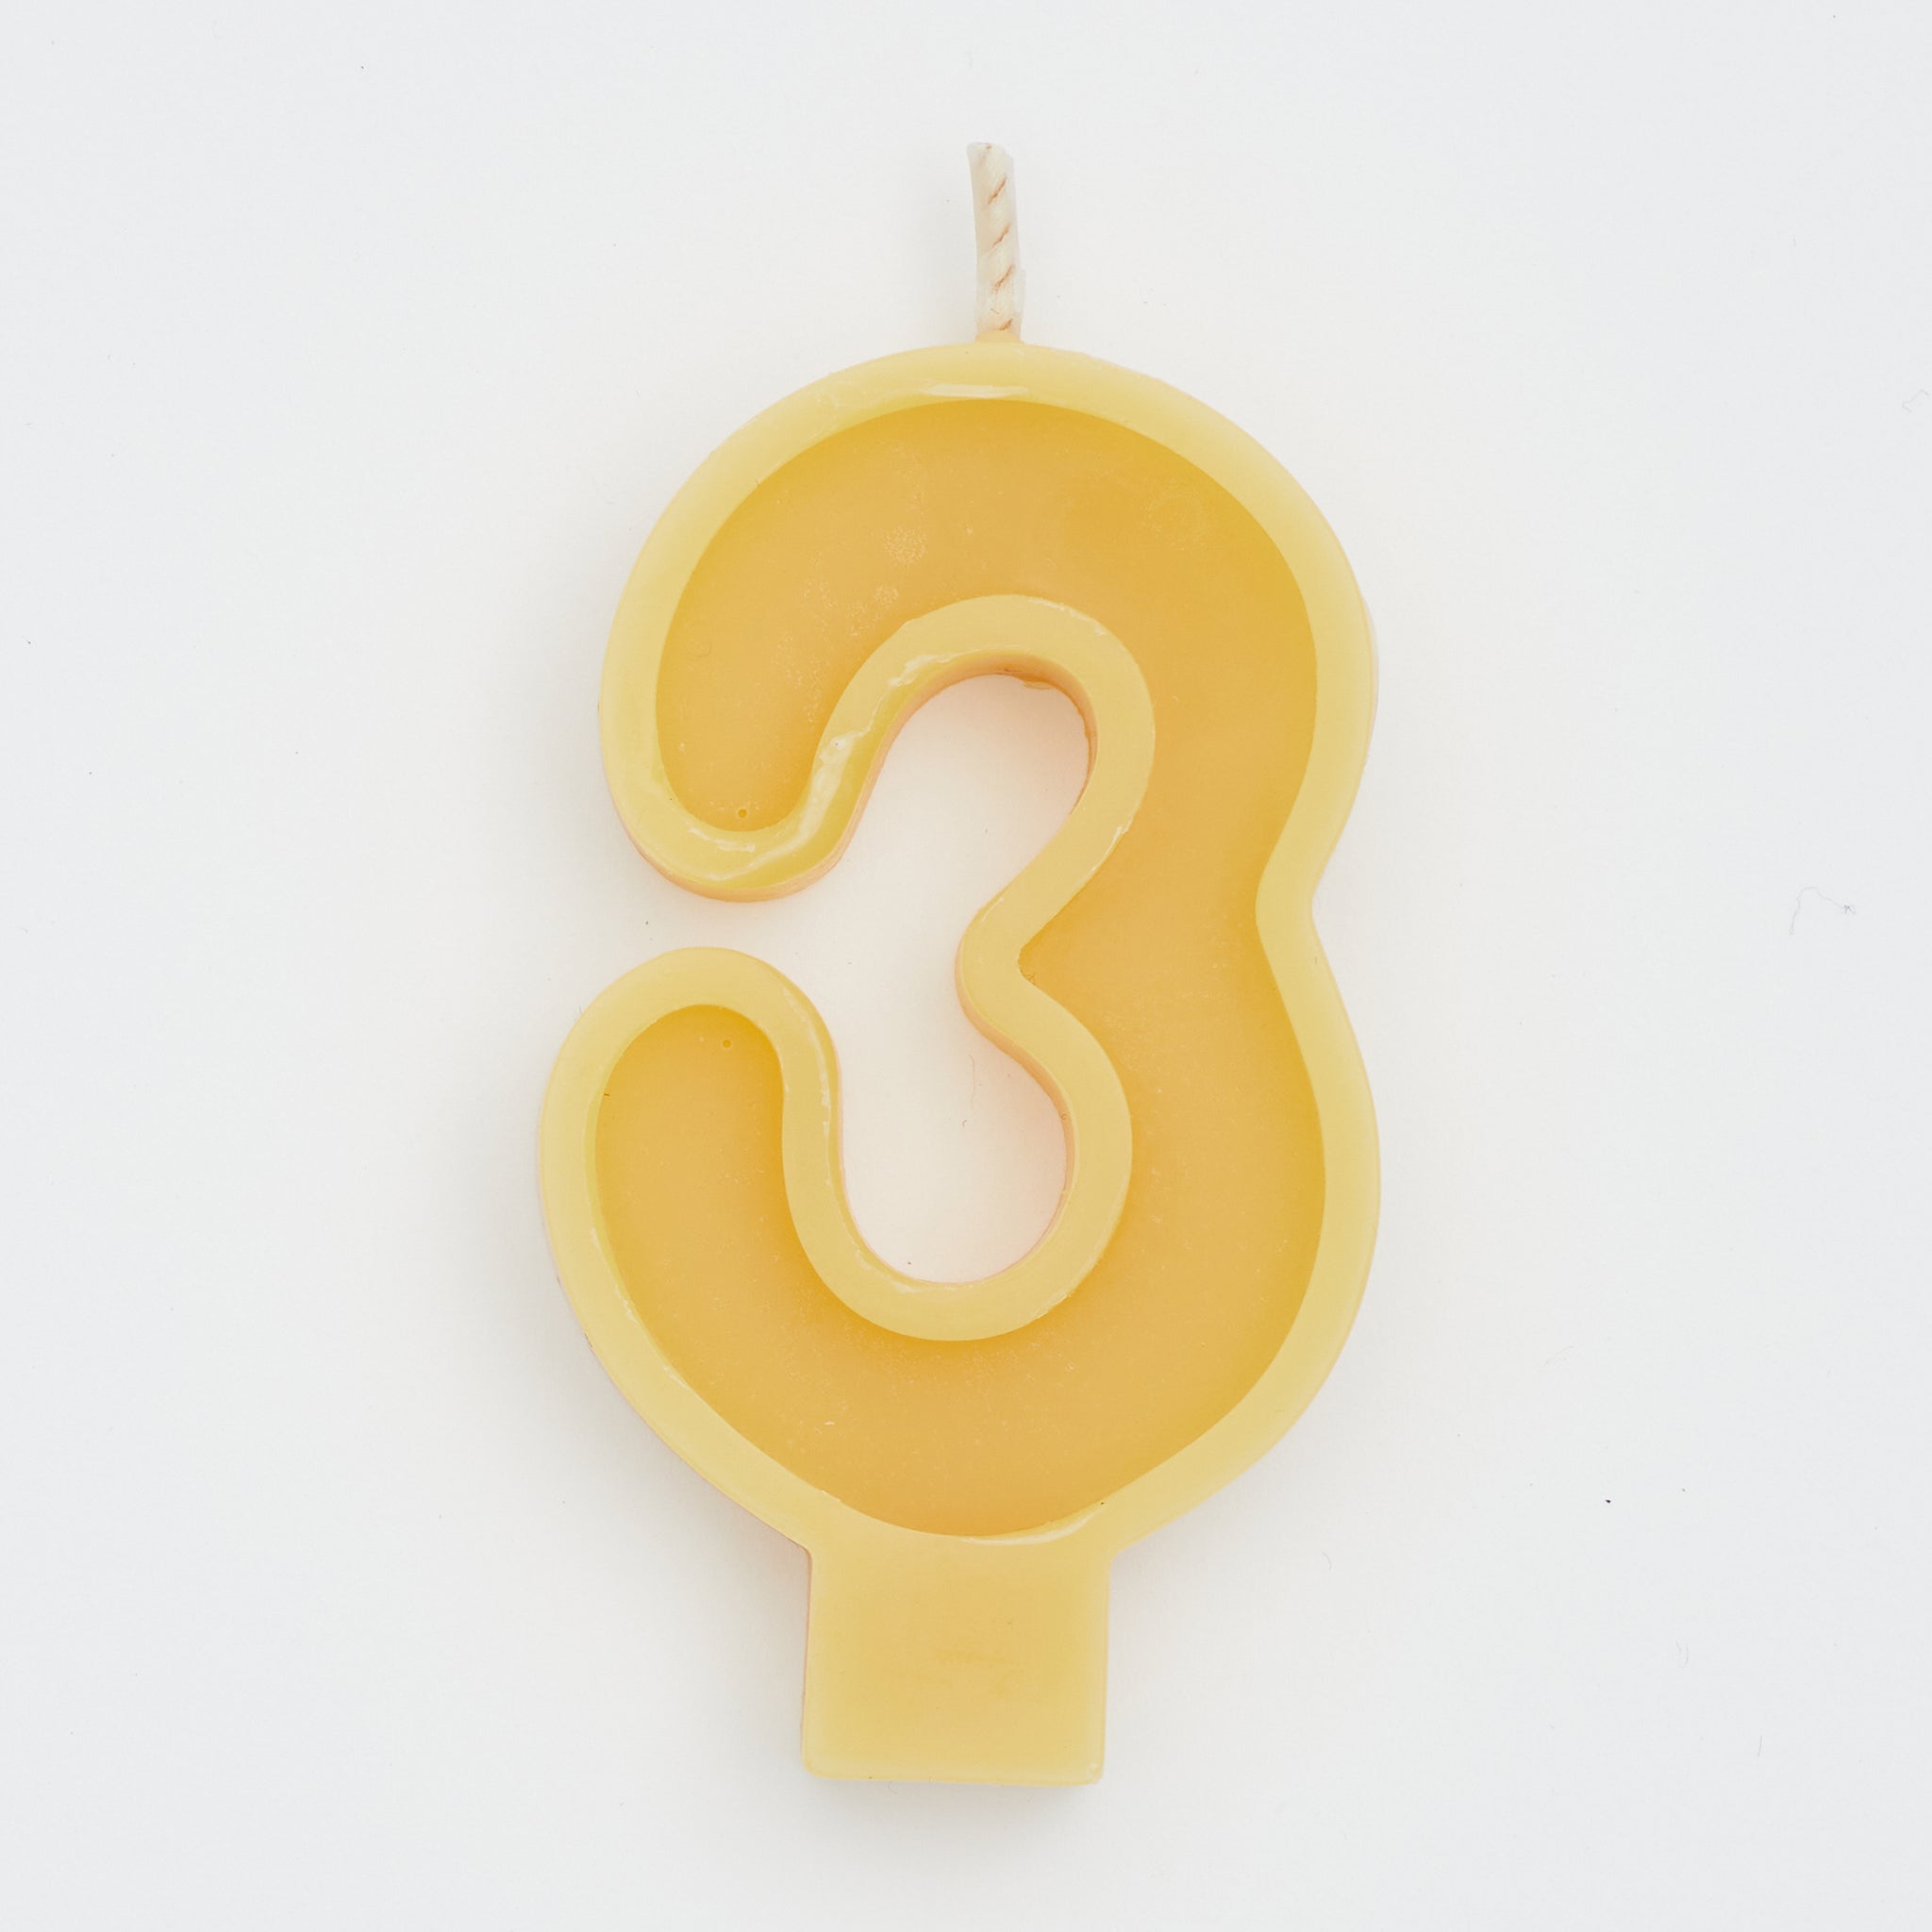 Blake & Mason Beeswax Celebration Number Candles | made in Australia